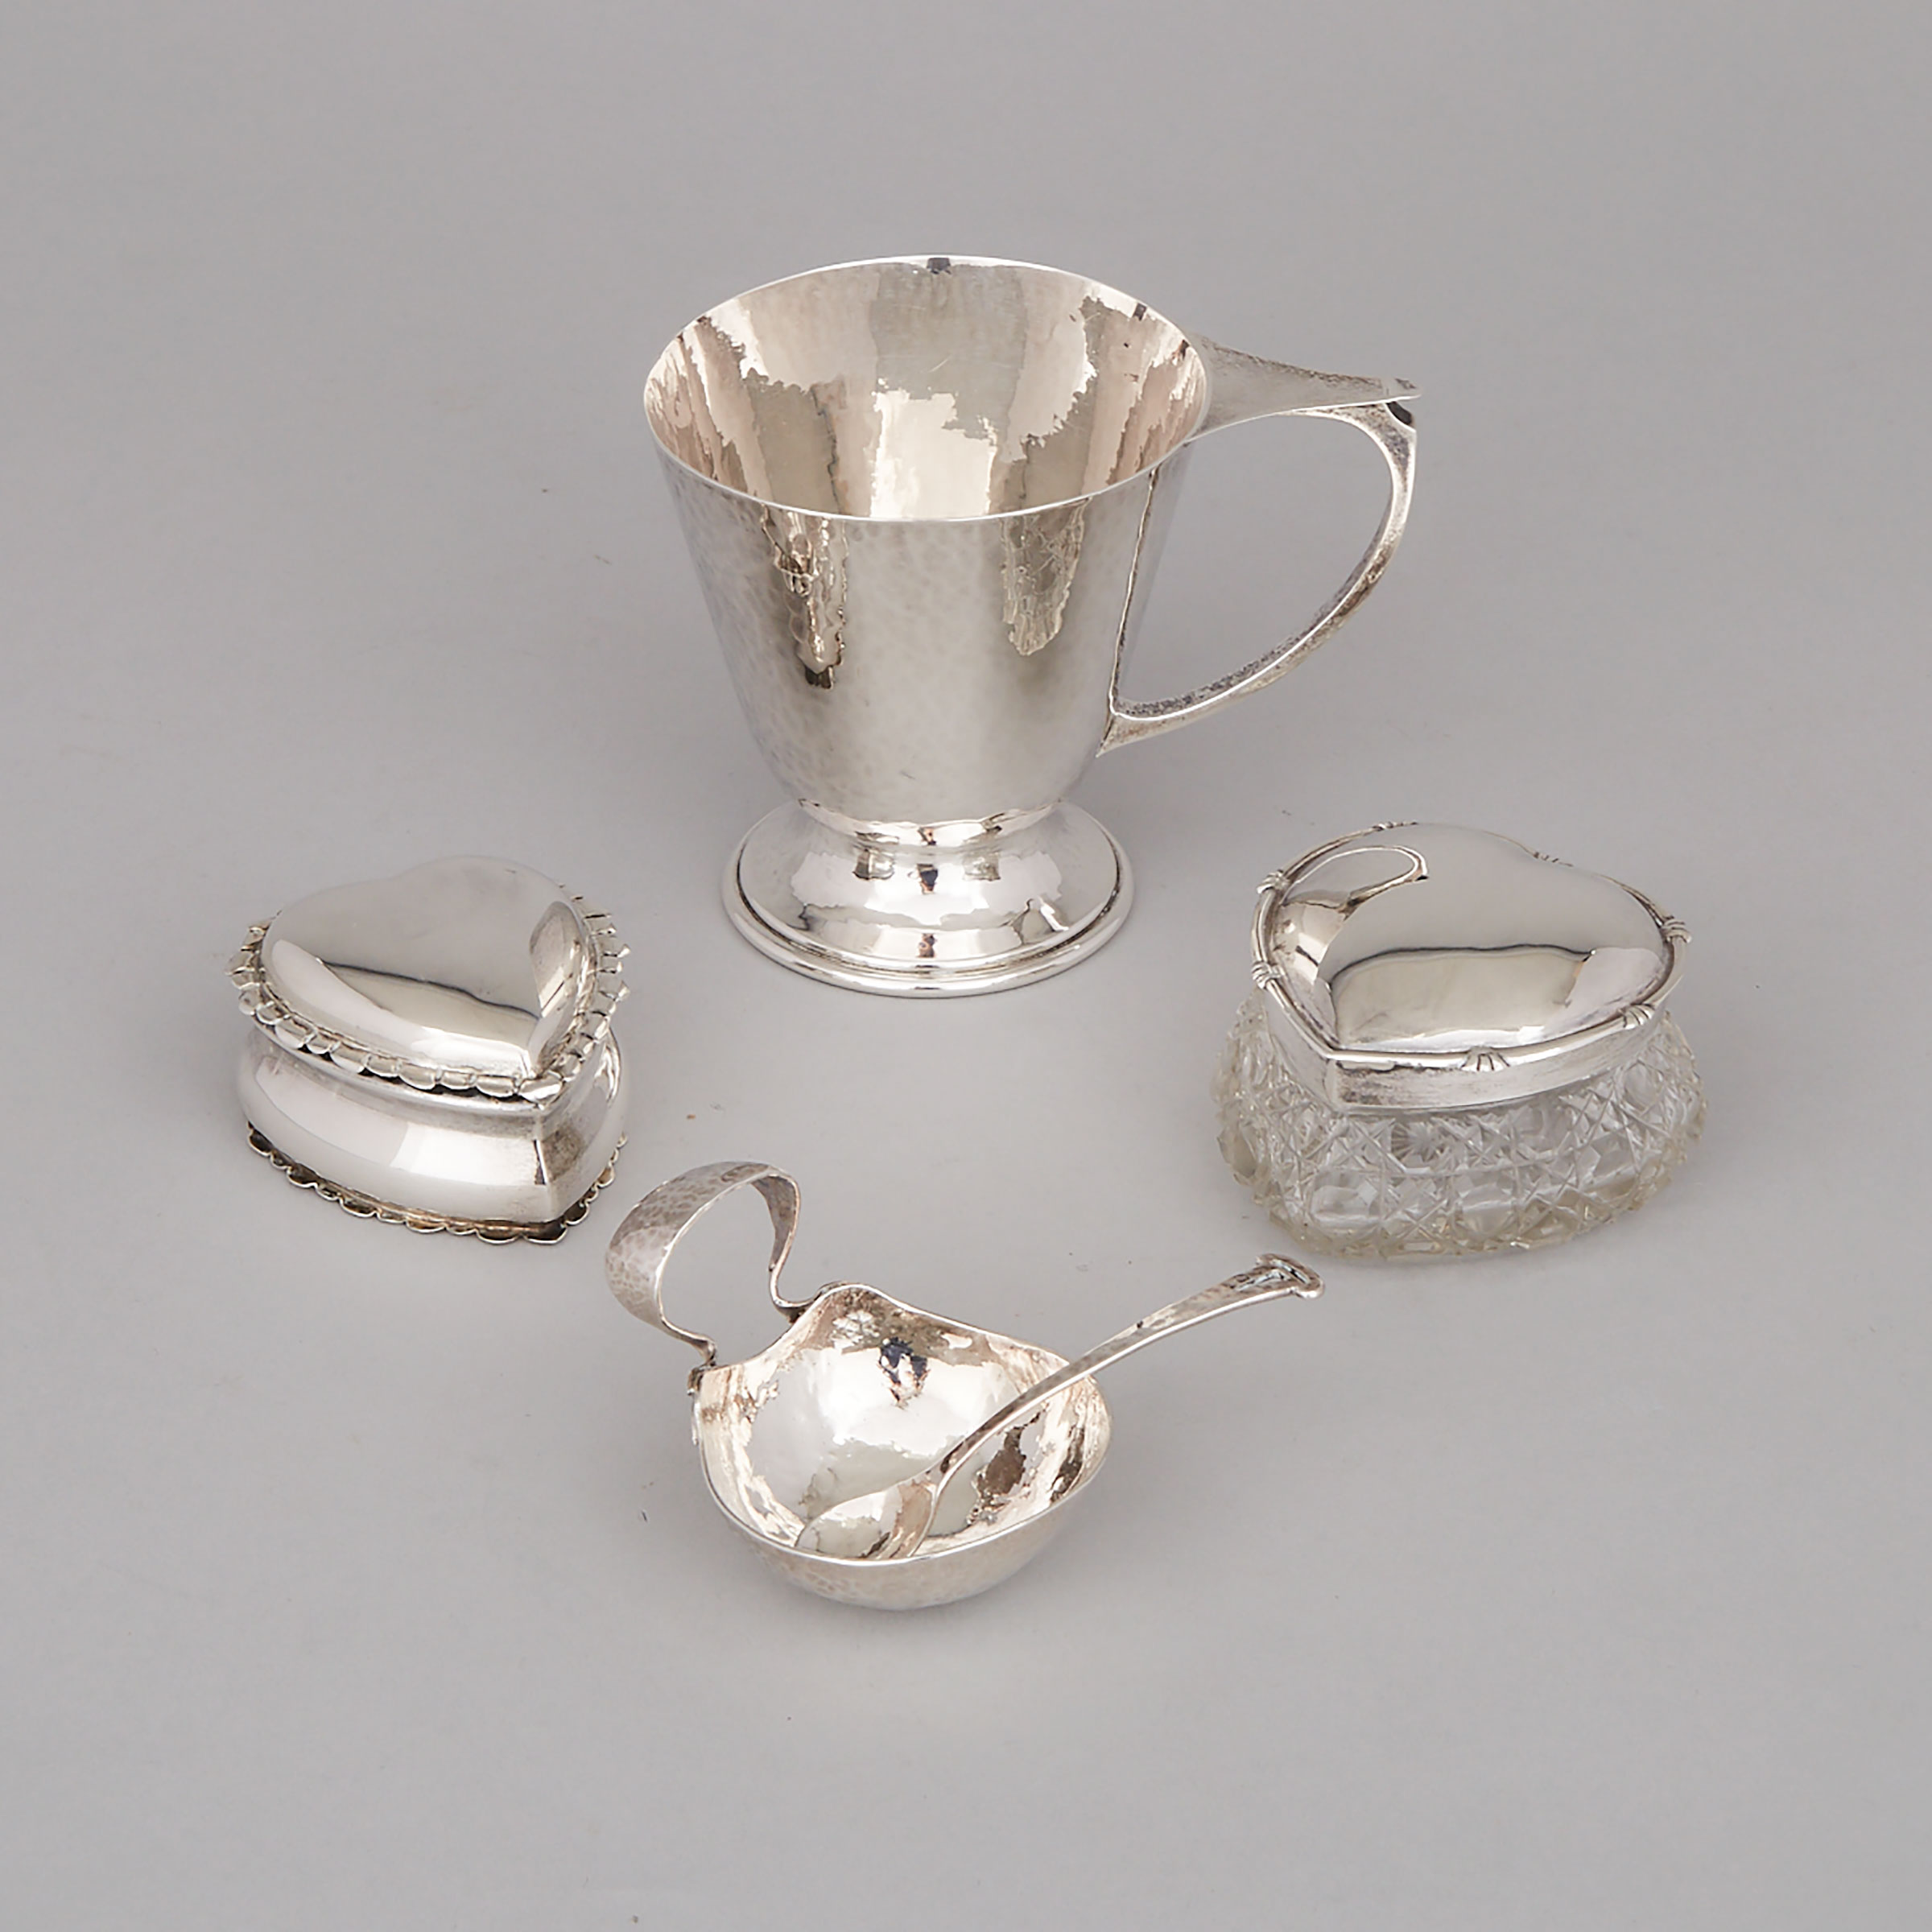 English Silver Mug, A.E. Jones, Birmingham, 1919, Two Edwardian Heart Shaped Boxes, 1903/07 and an Arts & Crafts Salt Cellar with Spoon, 20th century